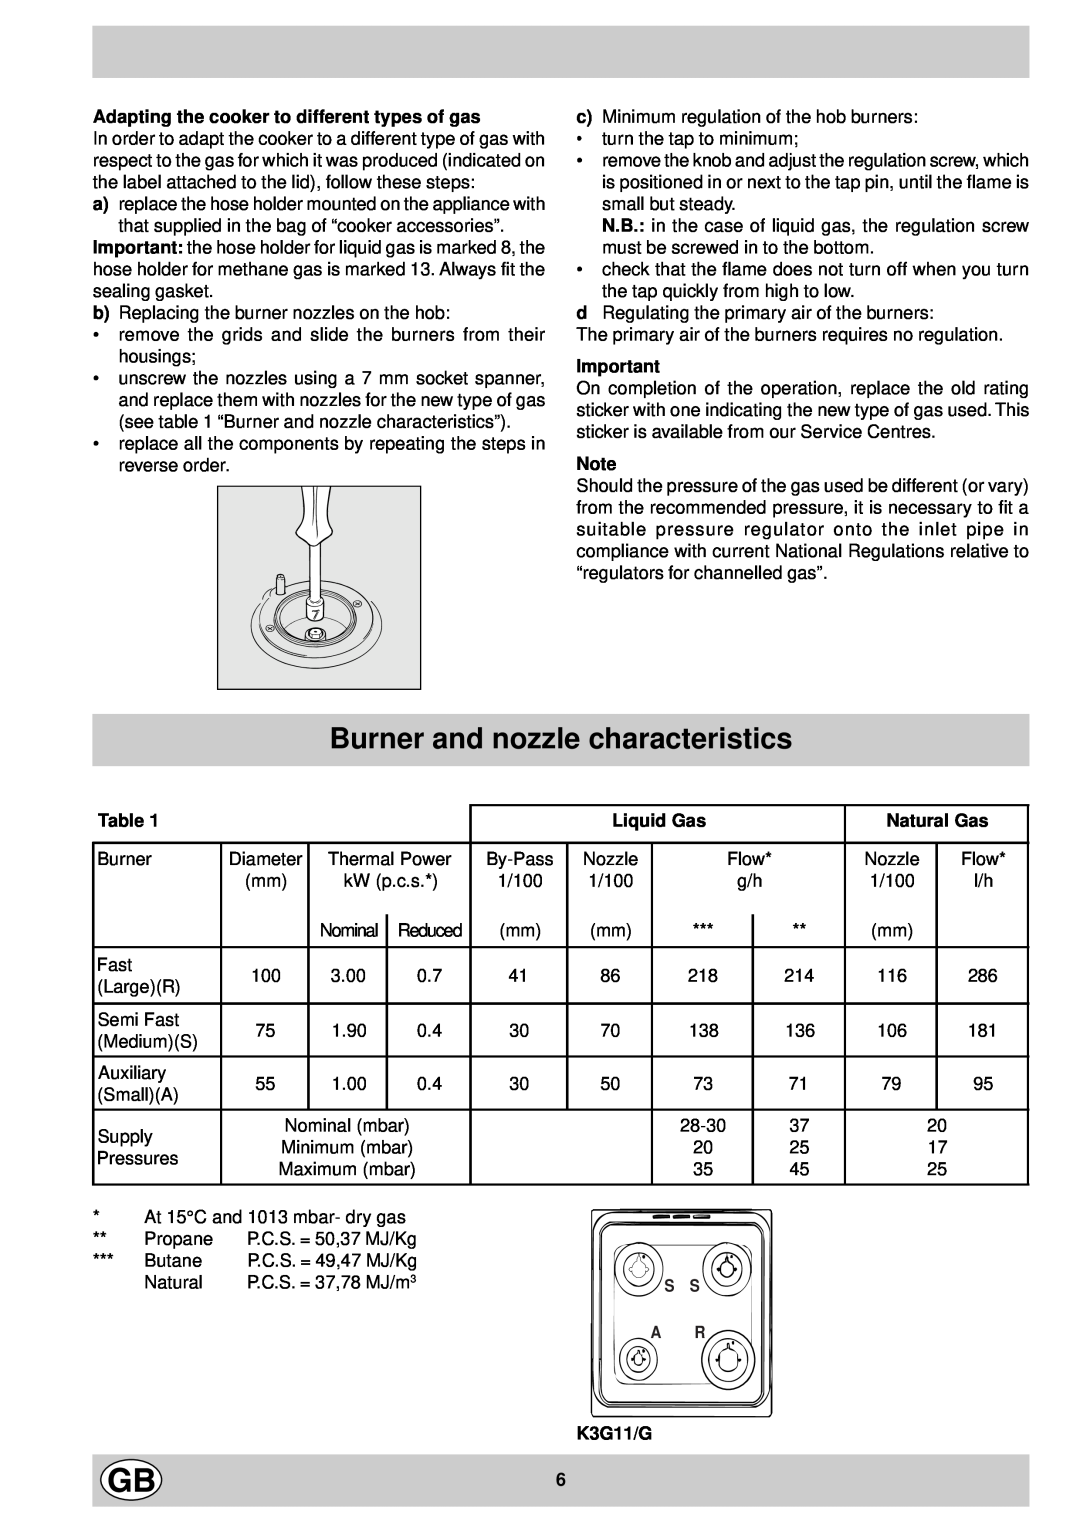 Indesit K3G11/G manual Burner and nozzle characteristics, Adapting the cooker to different types of gas, Table, Liquid Gas 